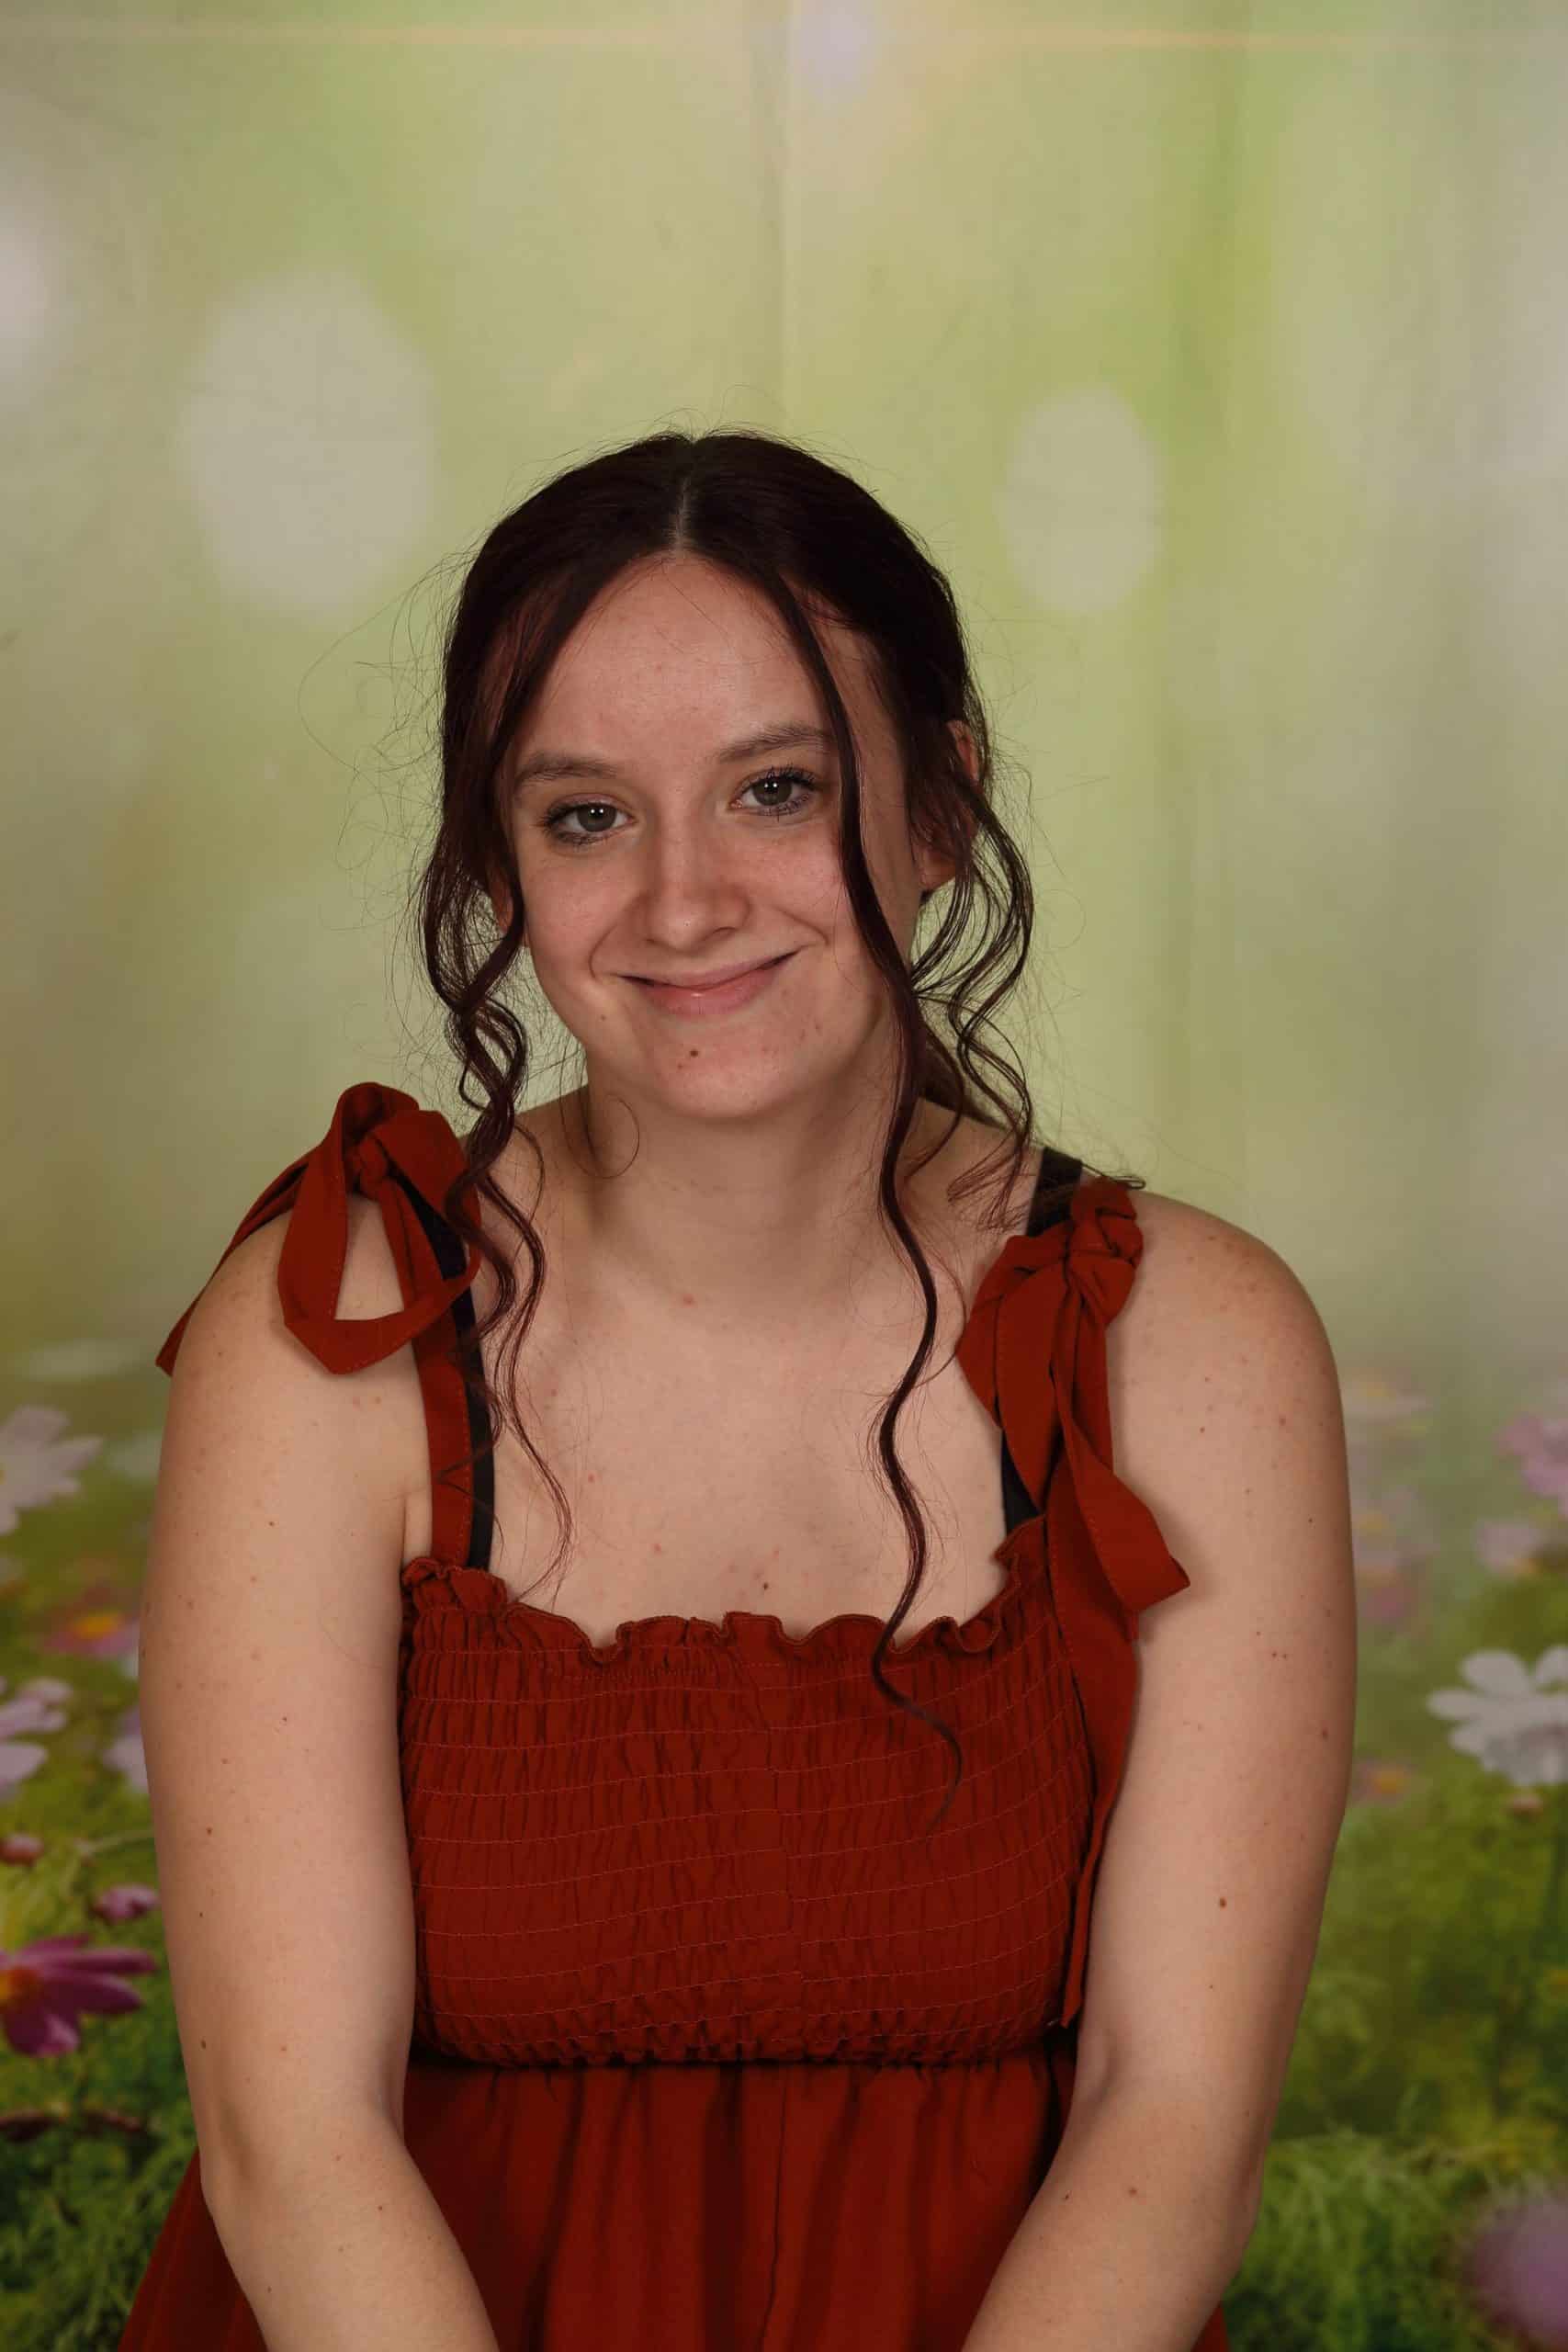 Photo of Co-Teacher Arianna McCorkle. She is a Caucasian woman with long brown hair and green eyes. She is smiling and wears a red dress.